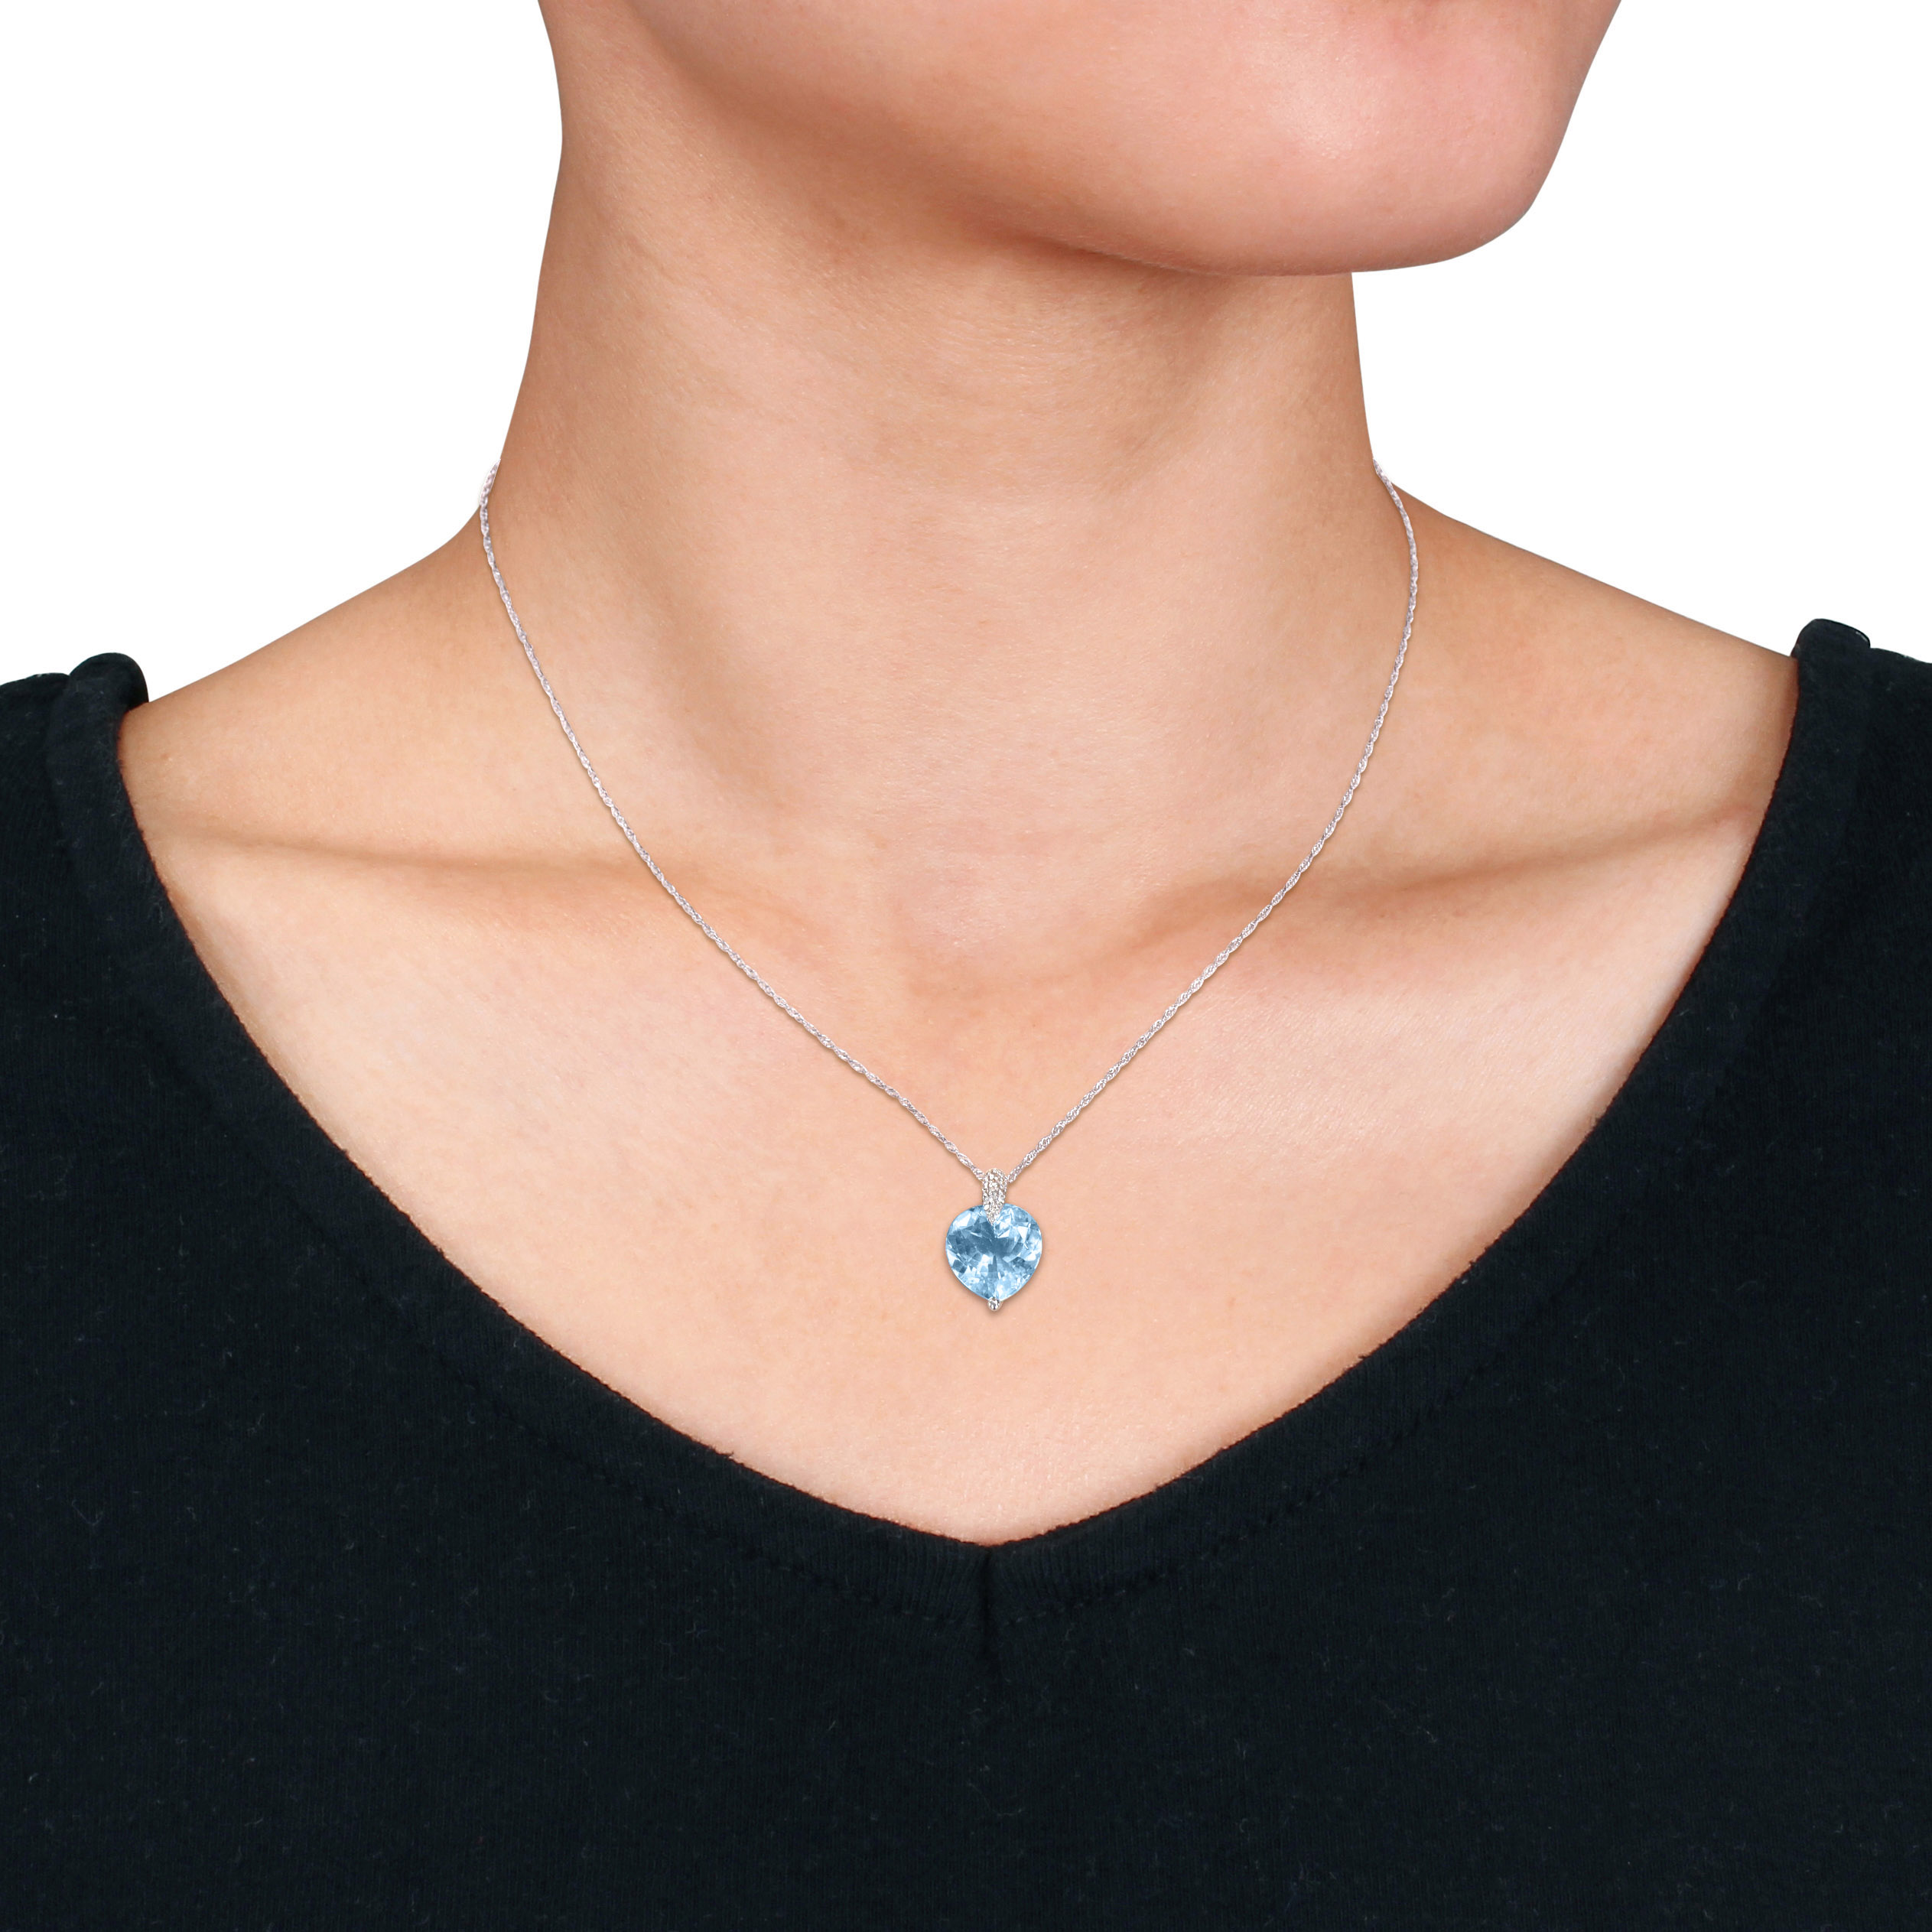 7 CT TGW Heart-cut Sky-Blue Topaz and 1/10ct TDW Diamond Drop Pendant with Chain in 14k White Gold - 18 in.